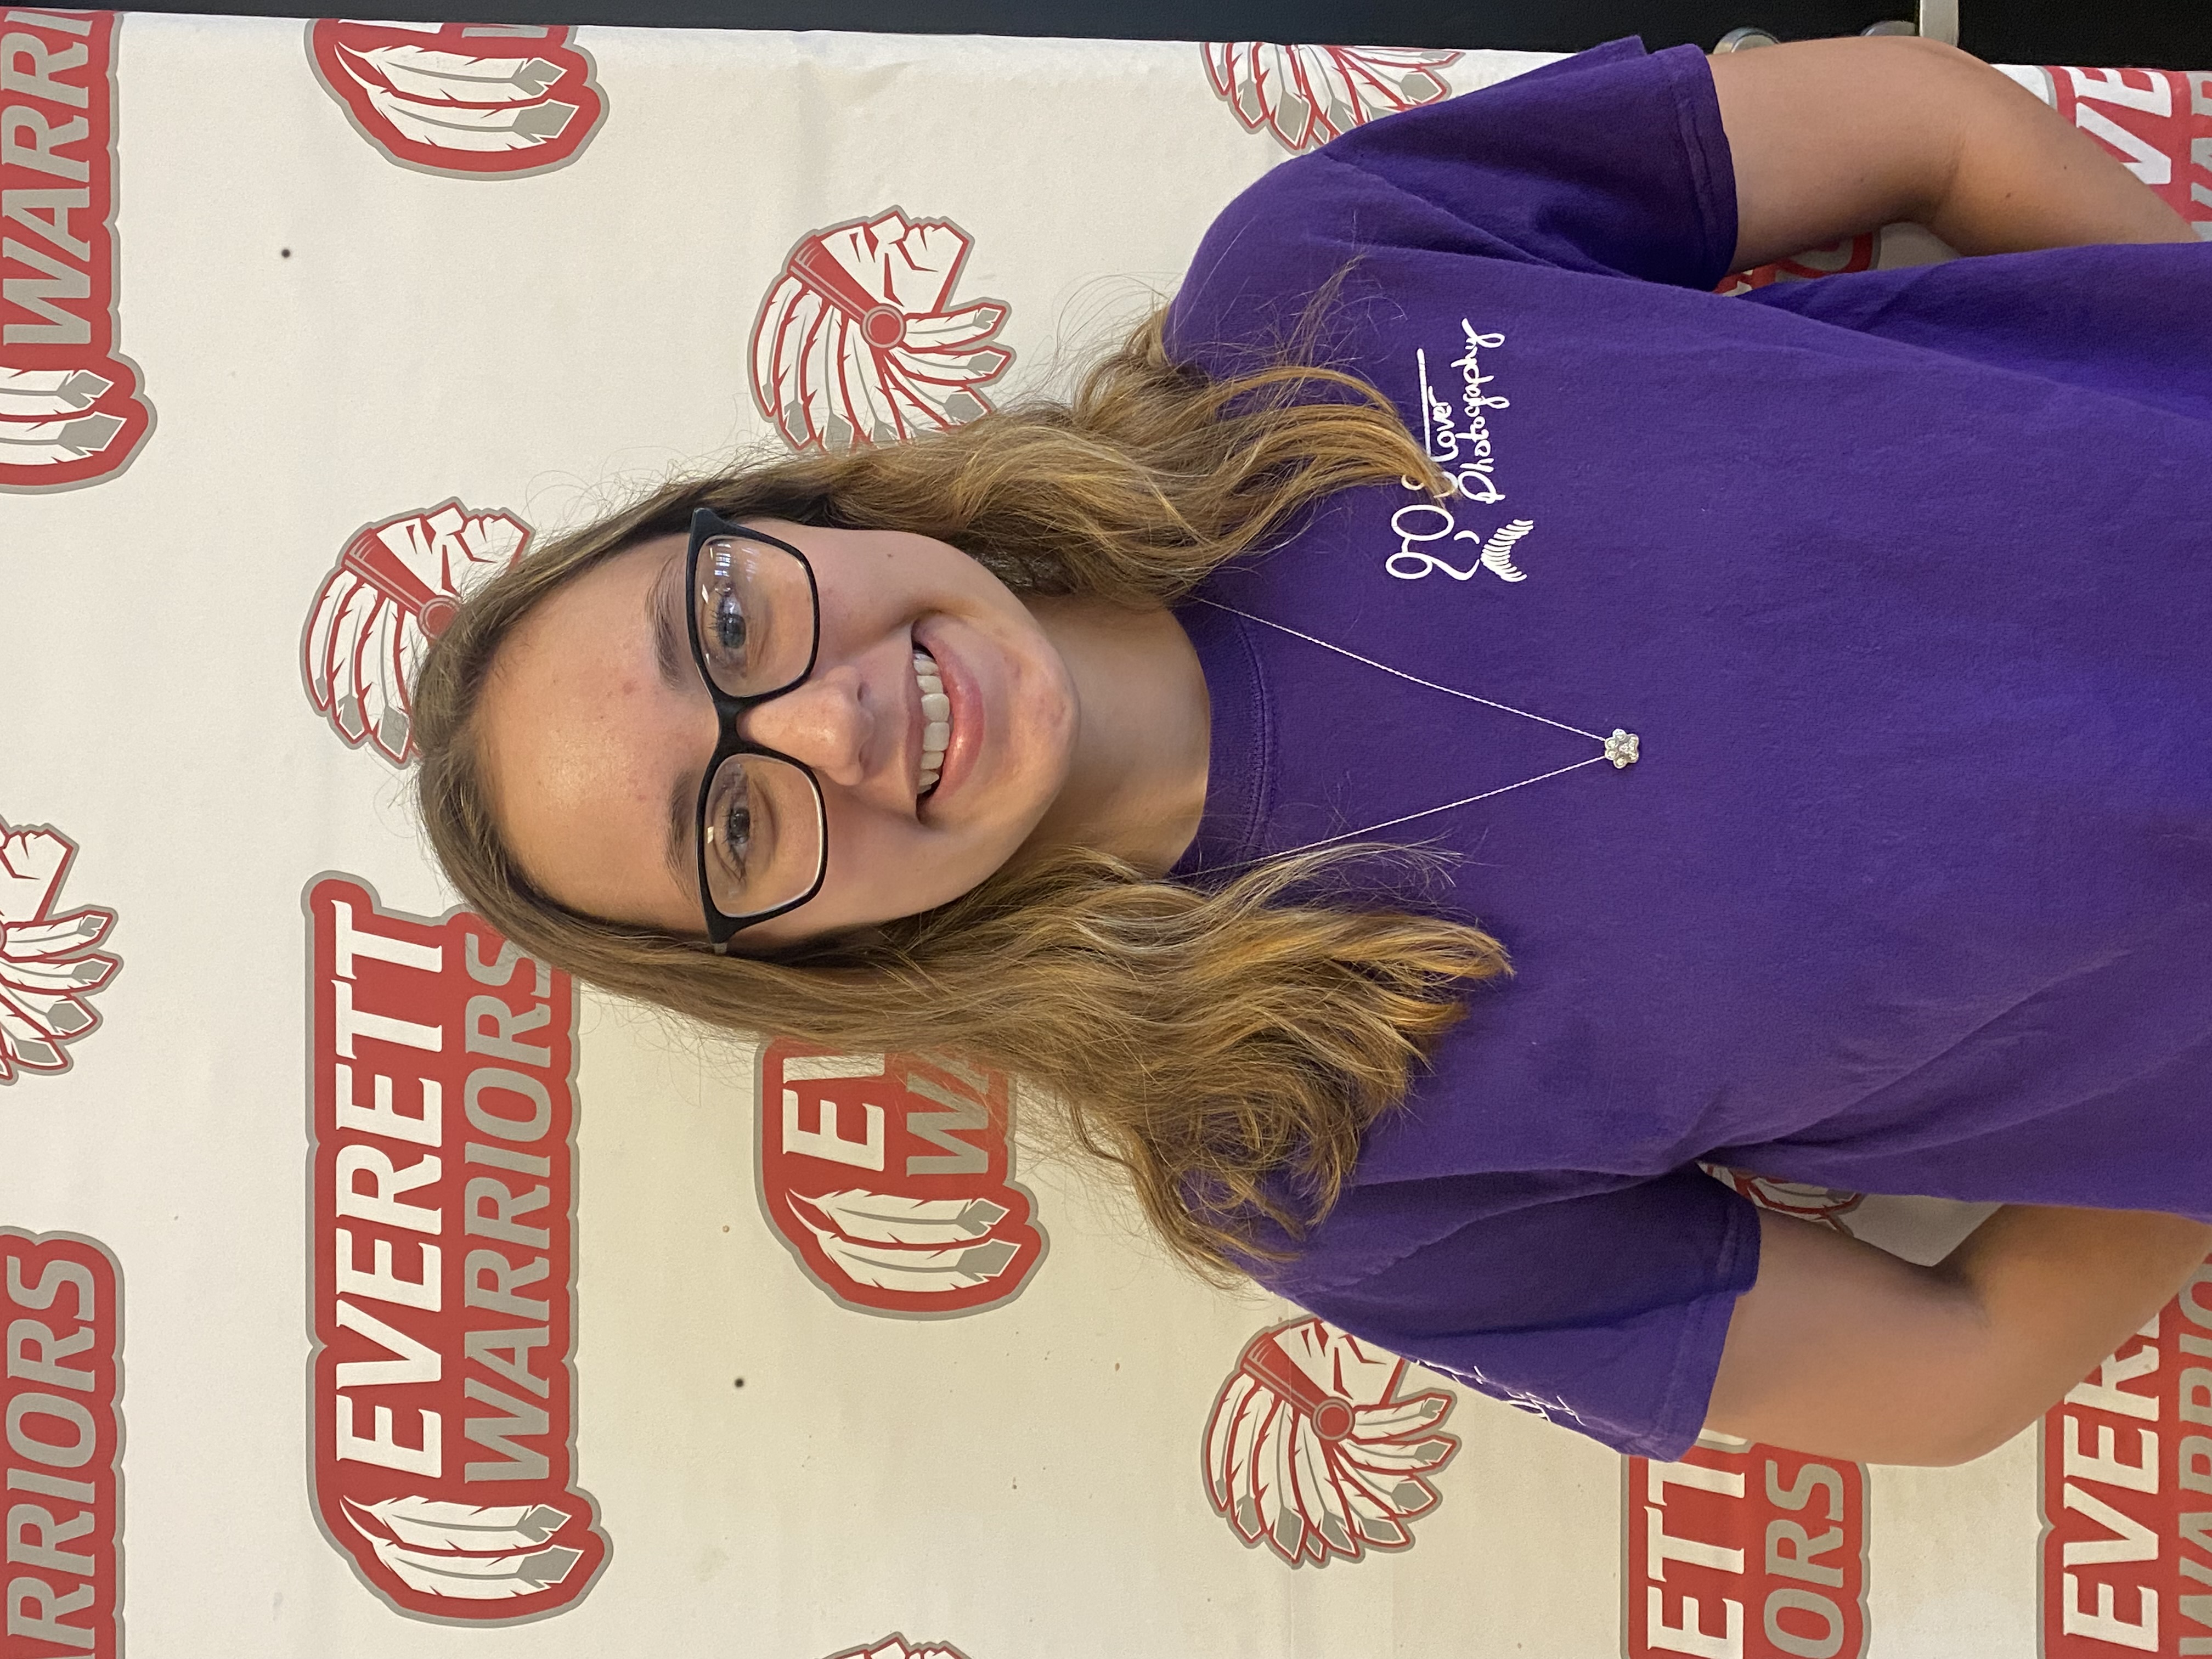 9th grade student of the month - Brenna Leasure